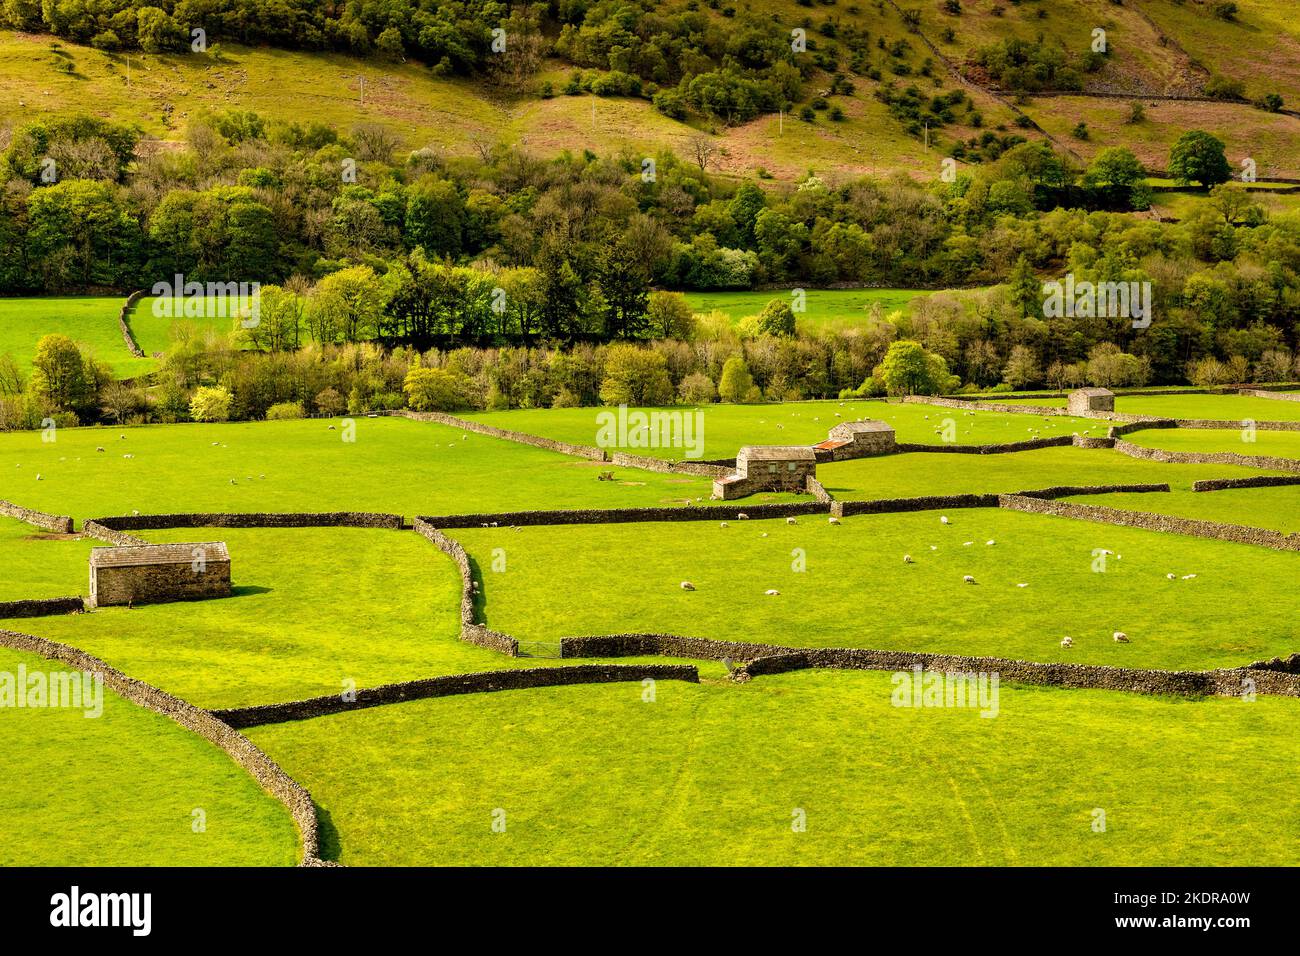 Typical Yorkshire Dales landscape in Swaledale, with barns, sheep and dry stone walls. Stock Photo